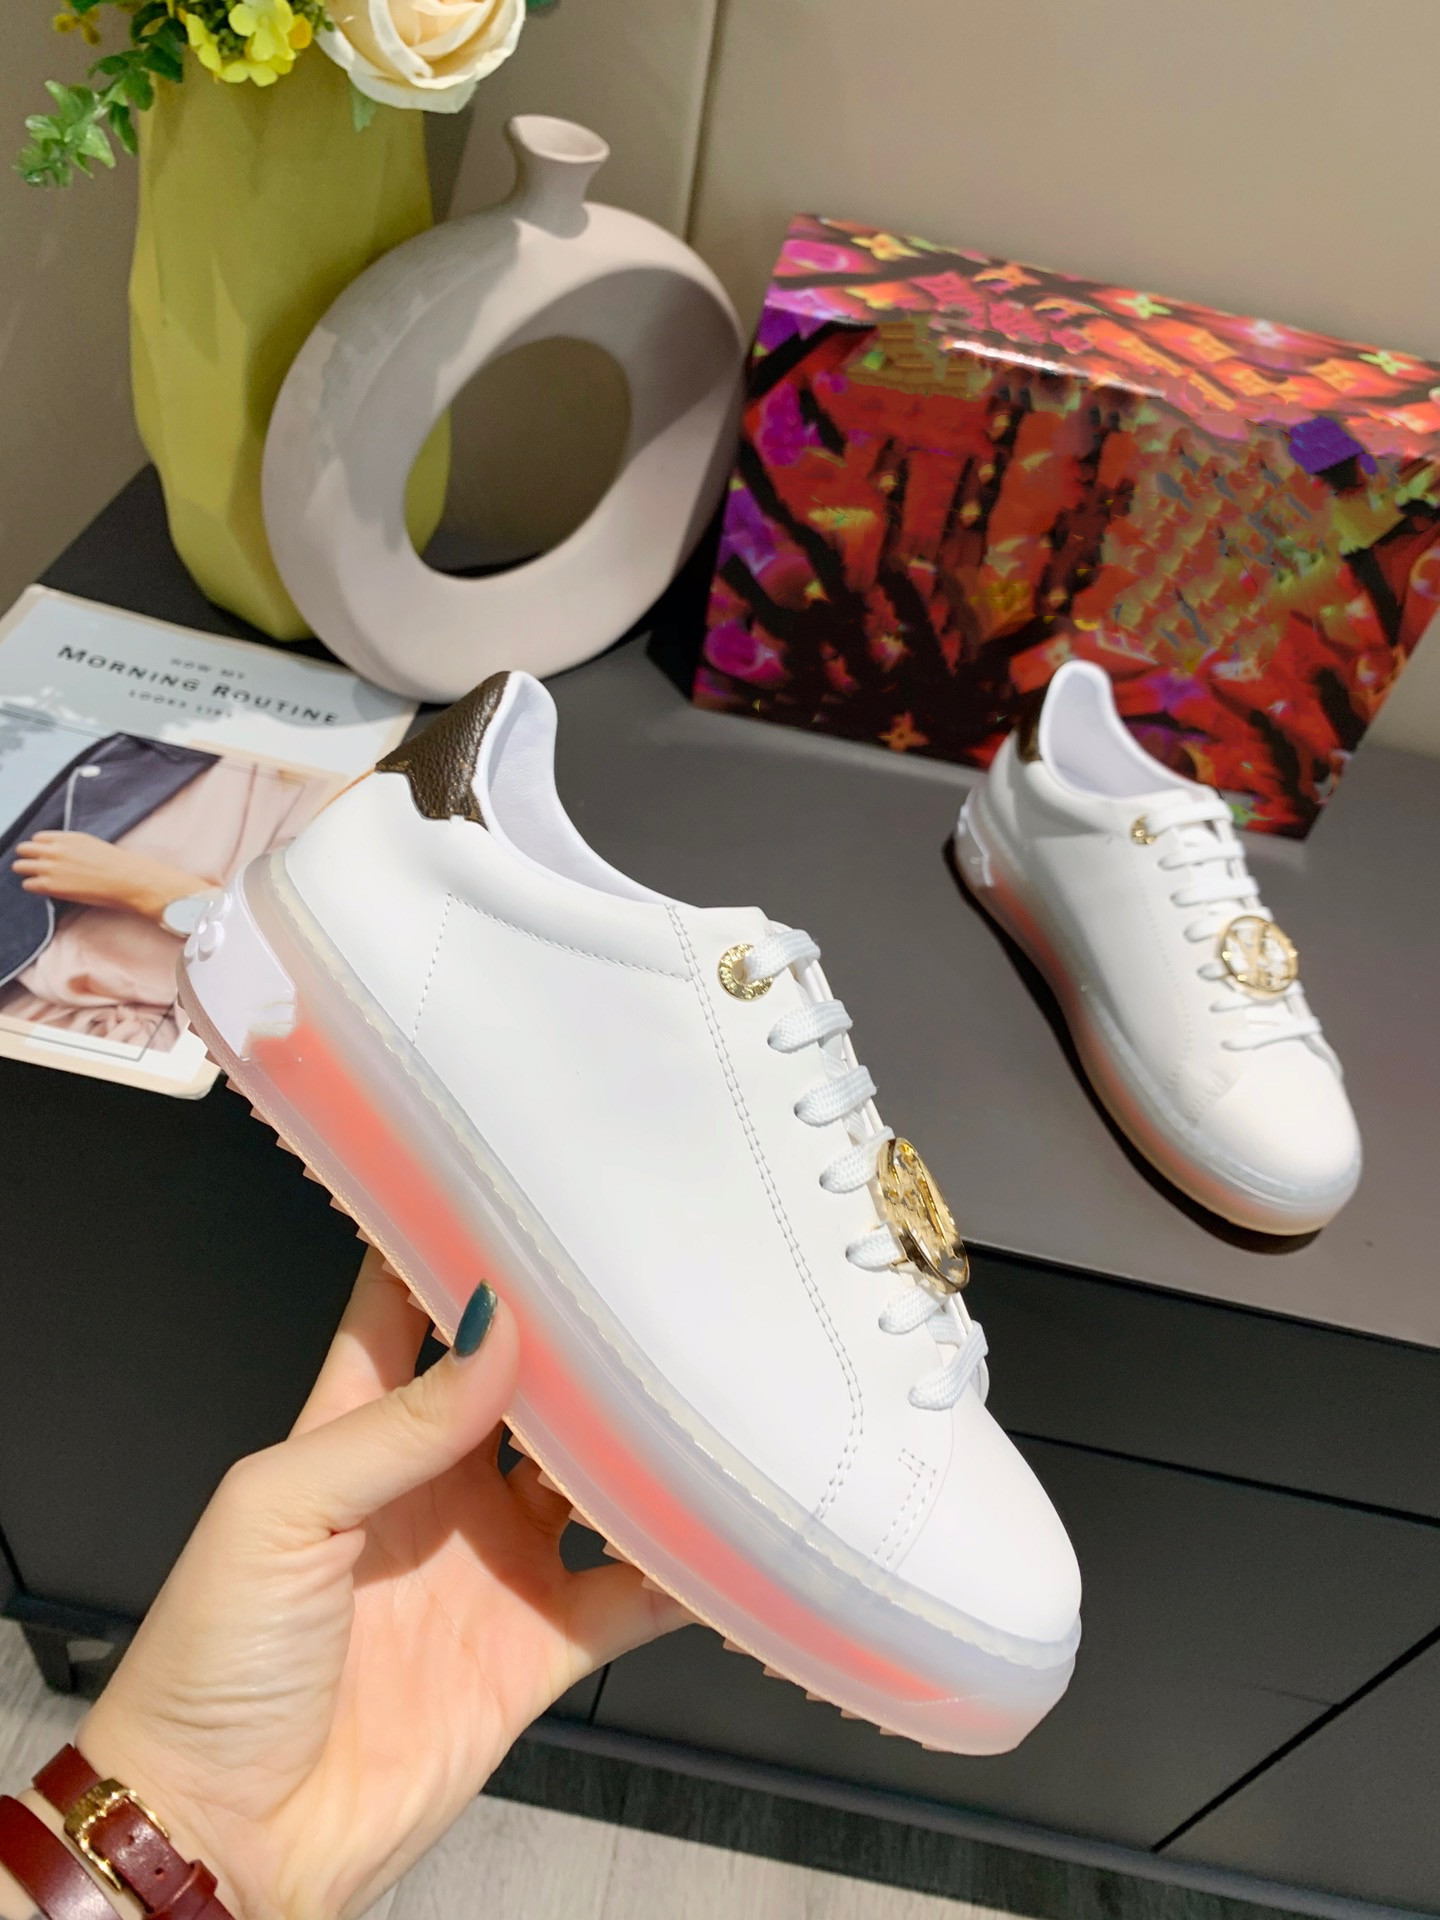 

New top Designer Mens Causal Shoes Fashion Woman Leather Lace Up Platform Sole Sneakers White 0502, 02